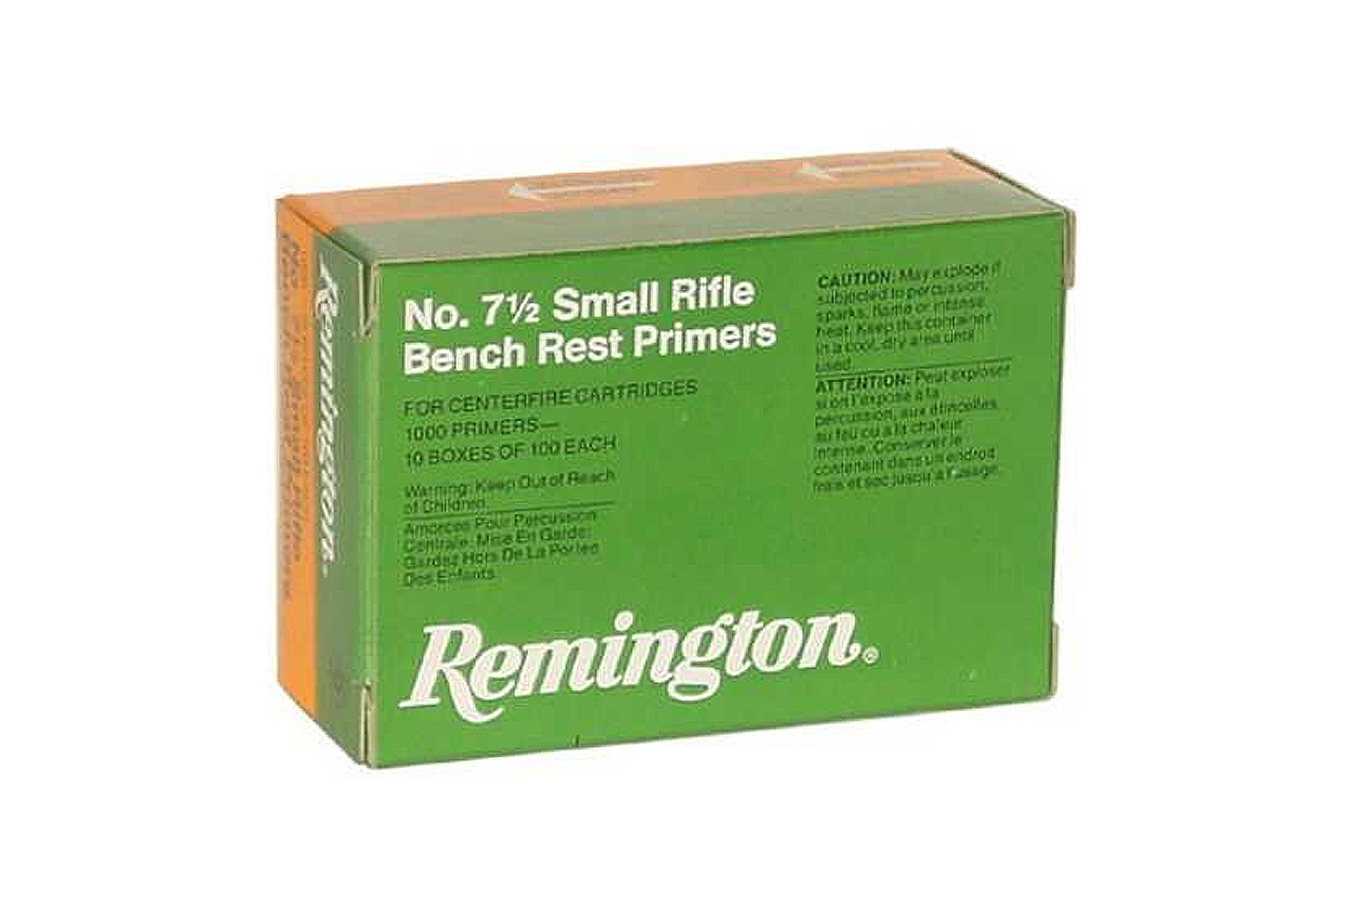 REMINGTON 7 1/2 SMALL RIFLE BENCH REST PRIMERS